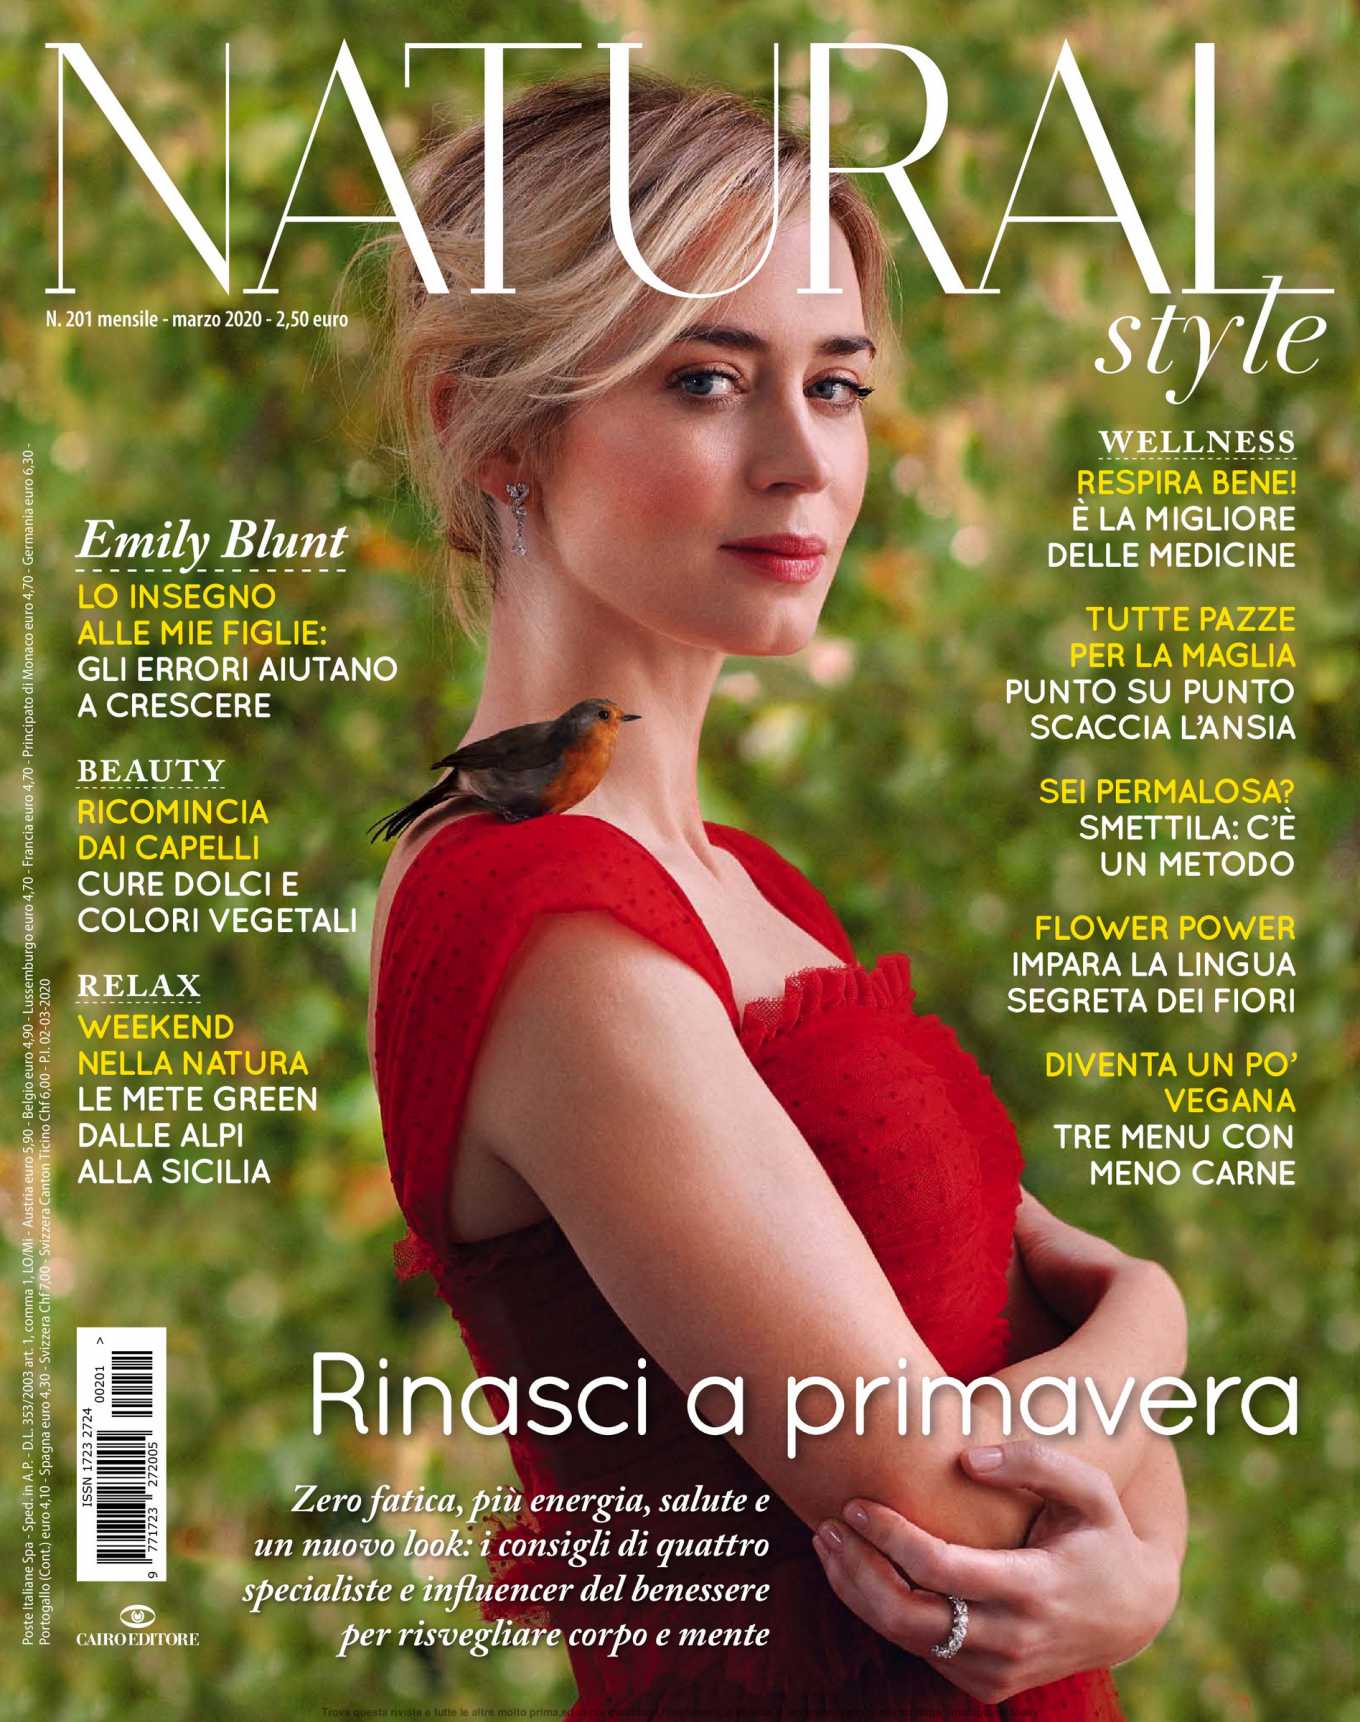 Emily Blunt - Natural Style Magazine (March 2020)